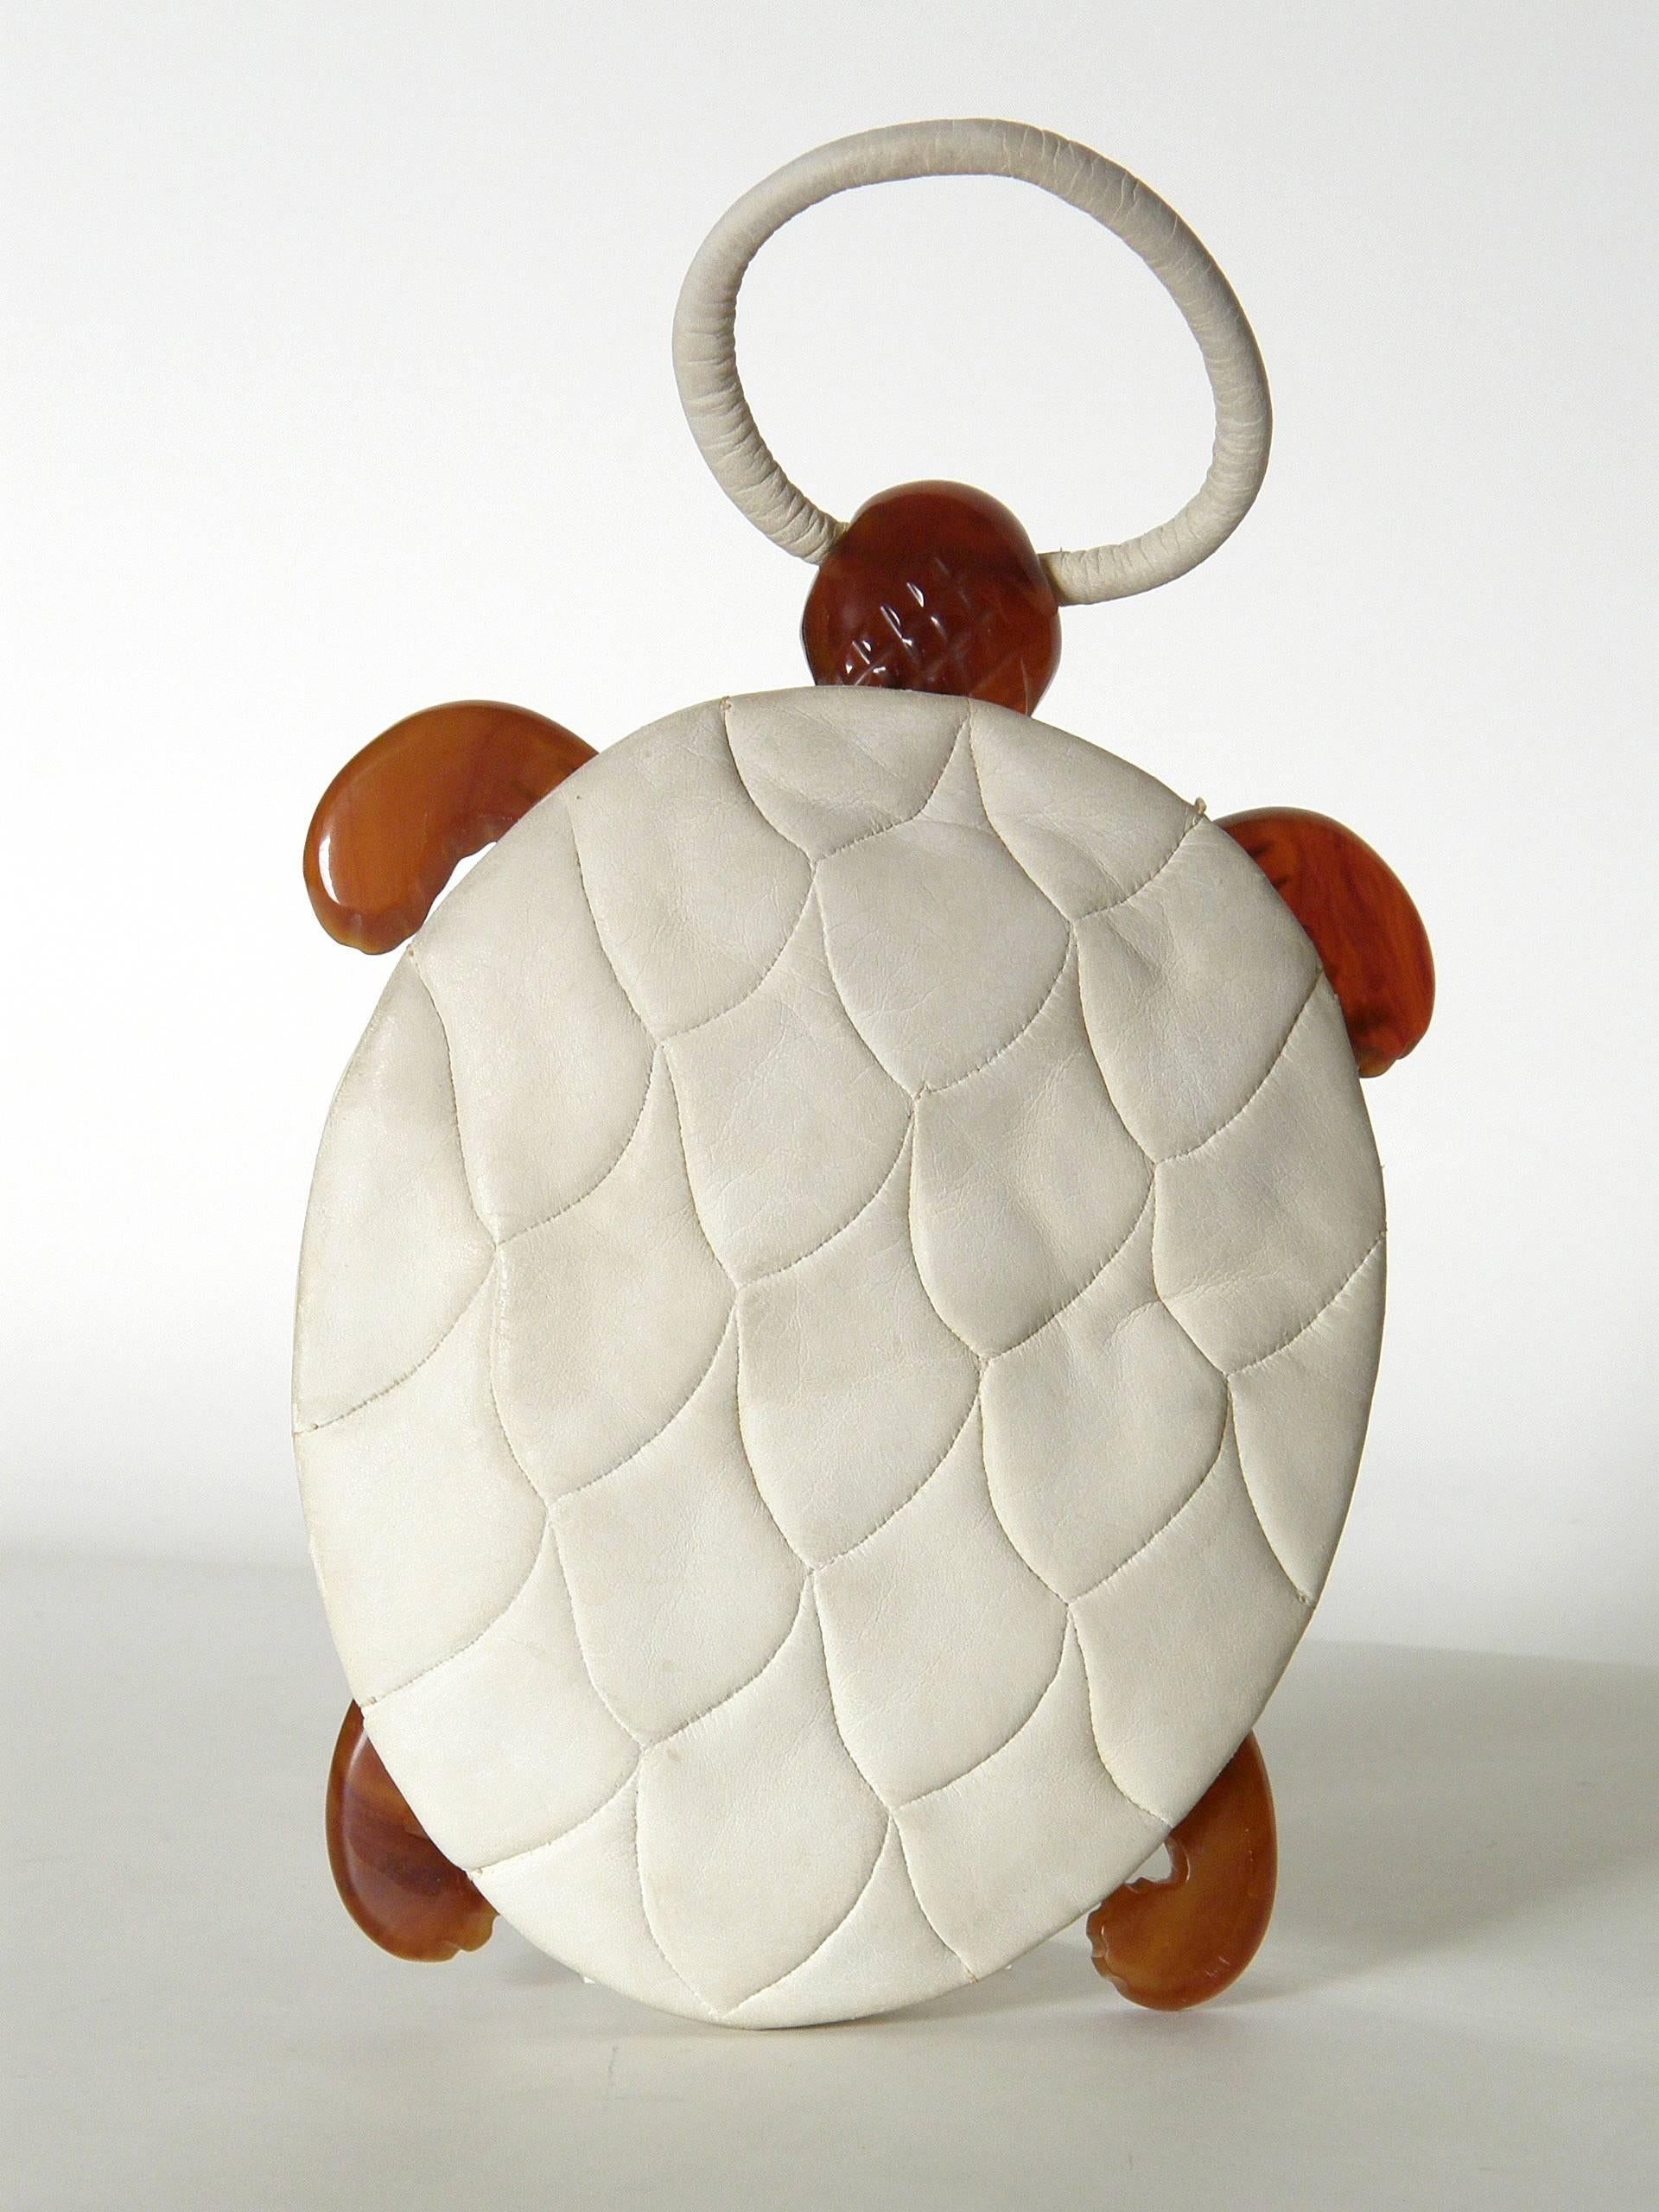 This adorable turtle shaped handbag has wonderful details. The body / shell of the turtle is done in soft, cream colored (kid?) suede. The back is pieced to resemble the pattern and texture of a turtle shell with plates. The belly of the turtle is